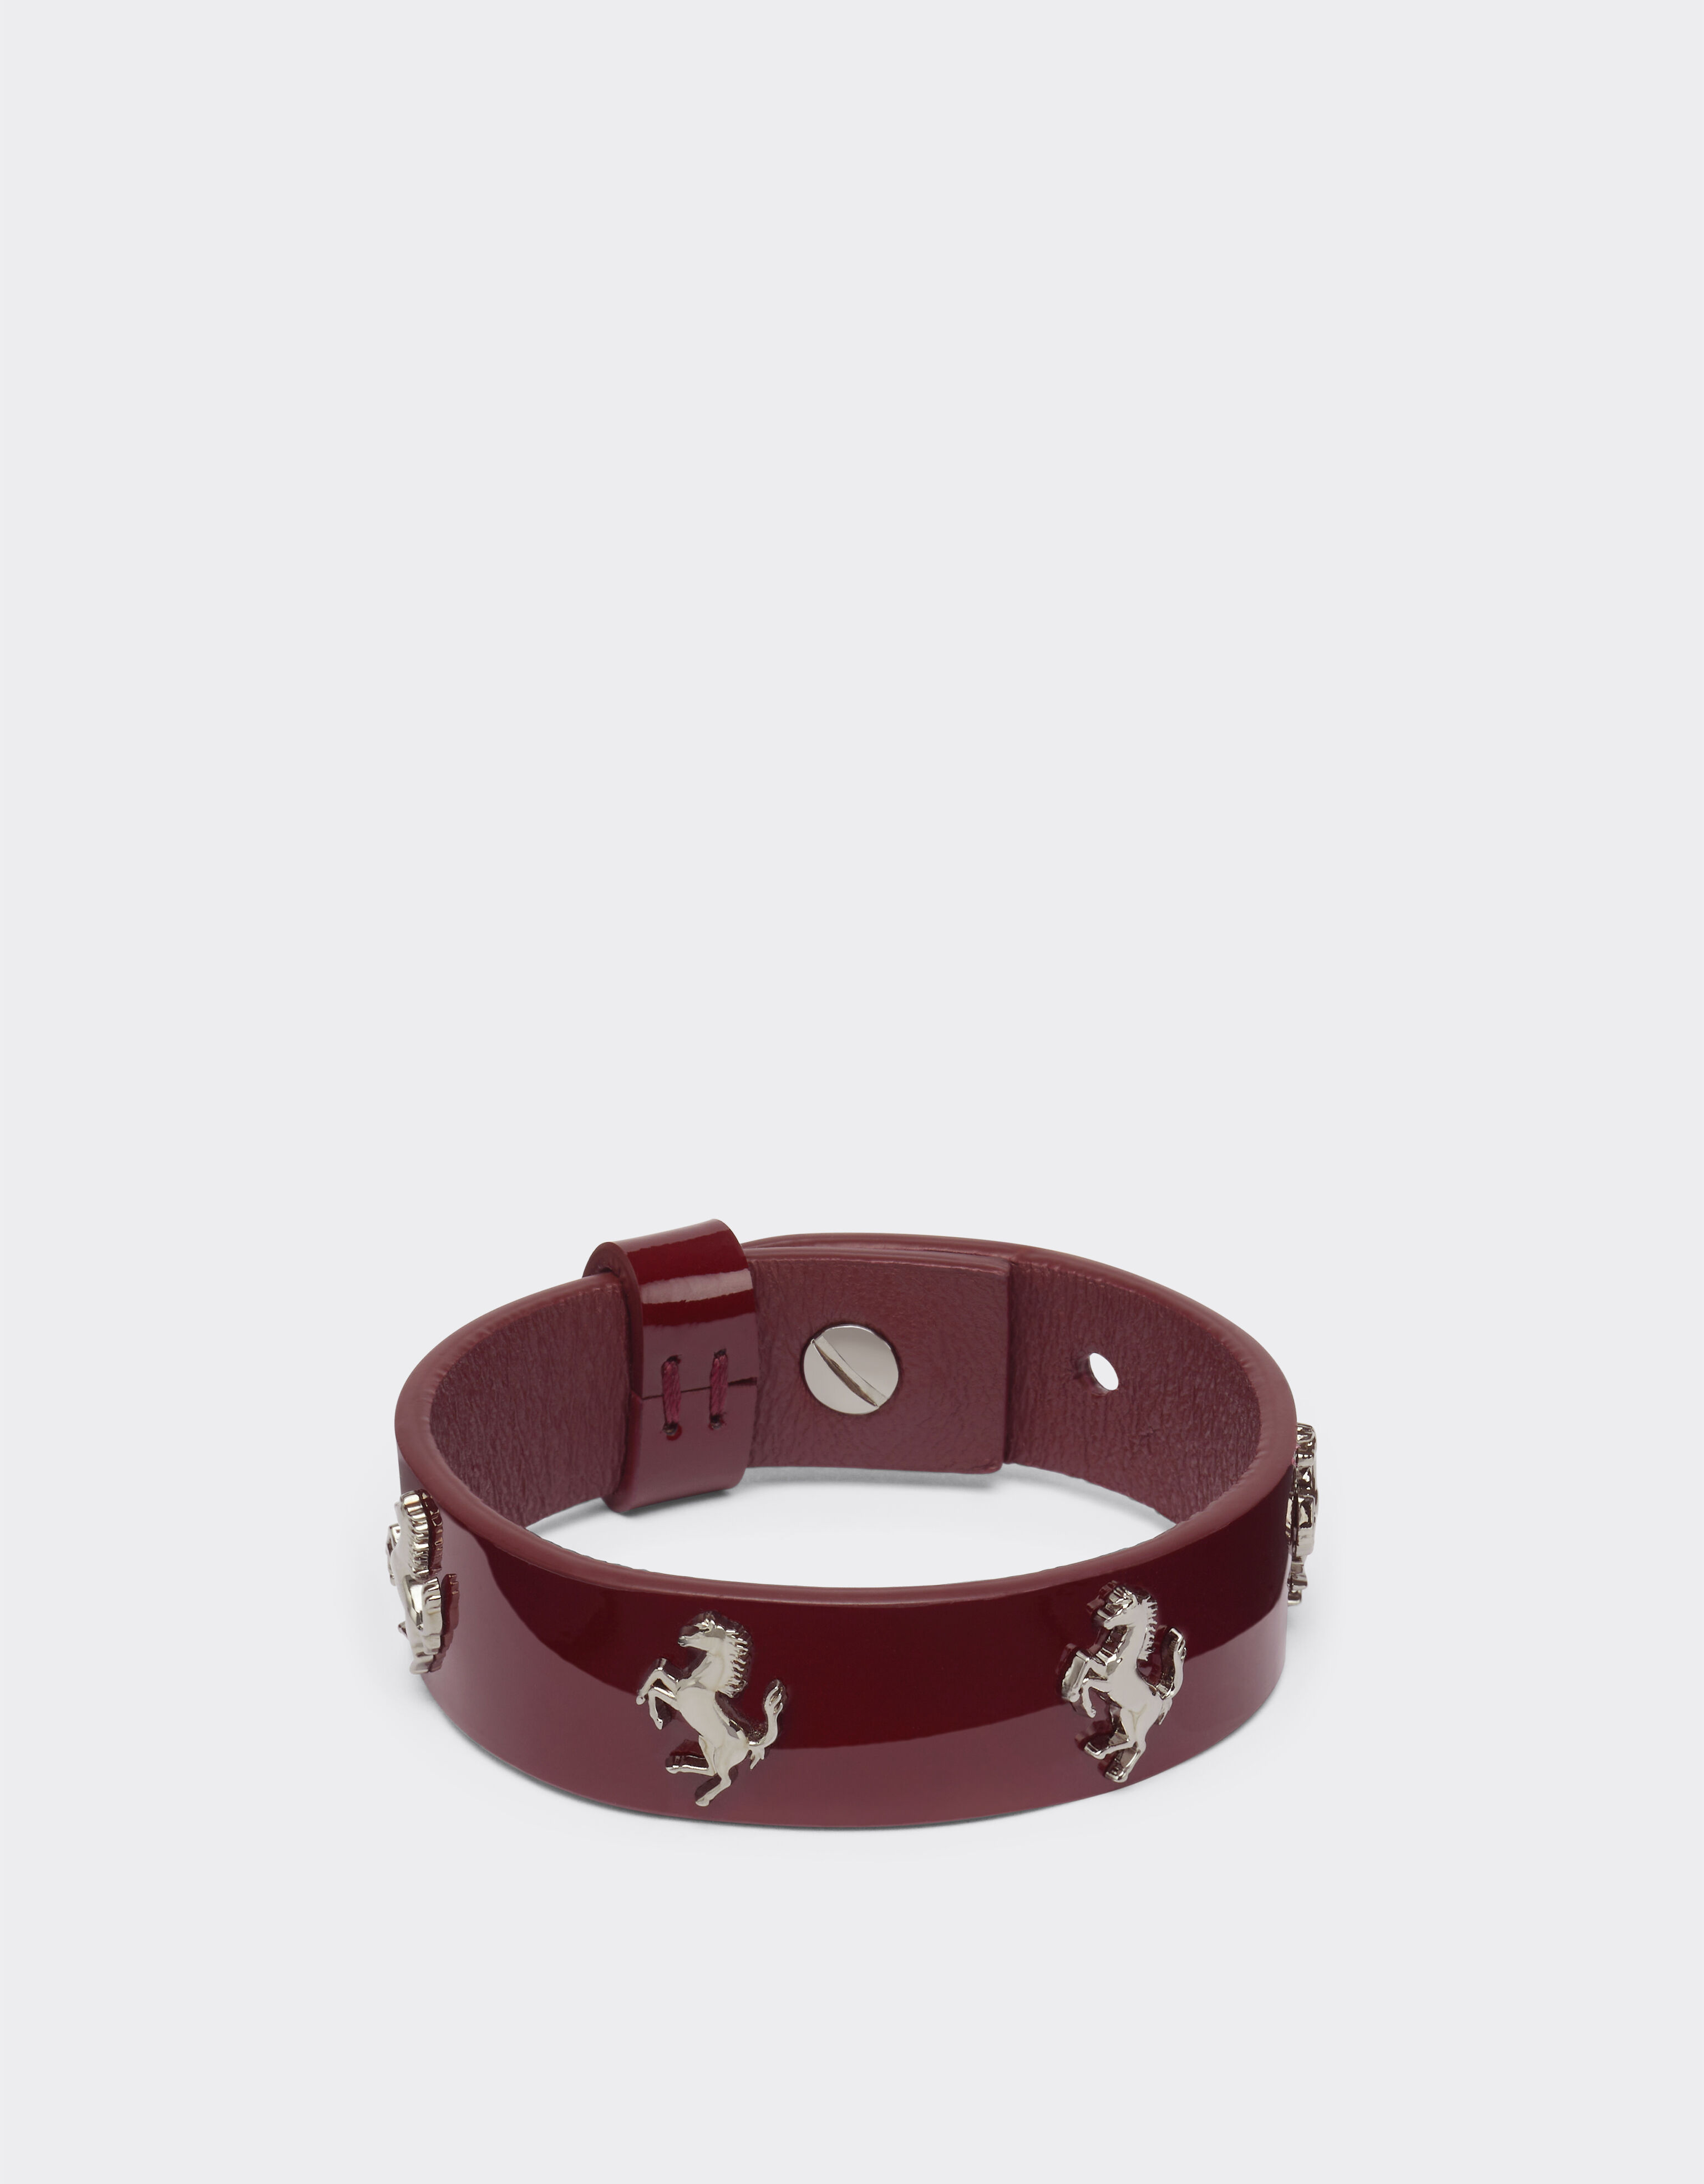 Ferrari Patent leather bracelet with studs Charcoal 20010f